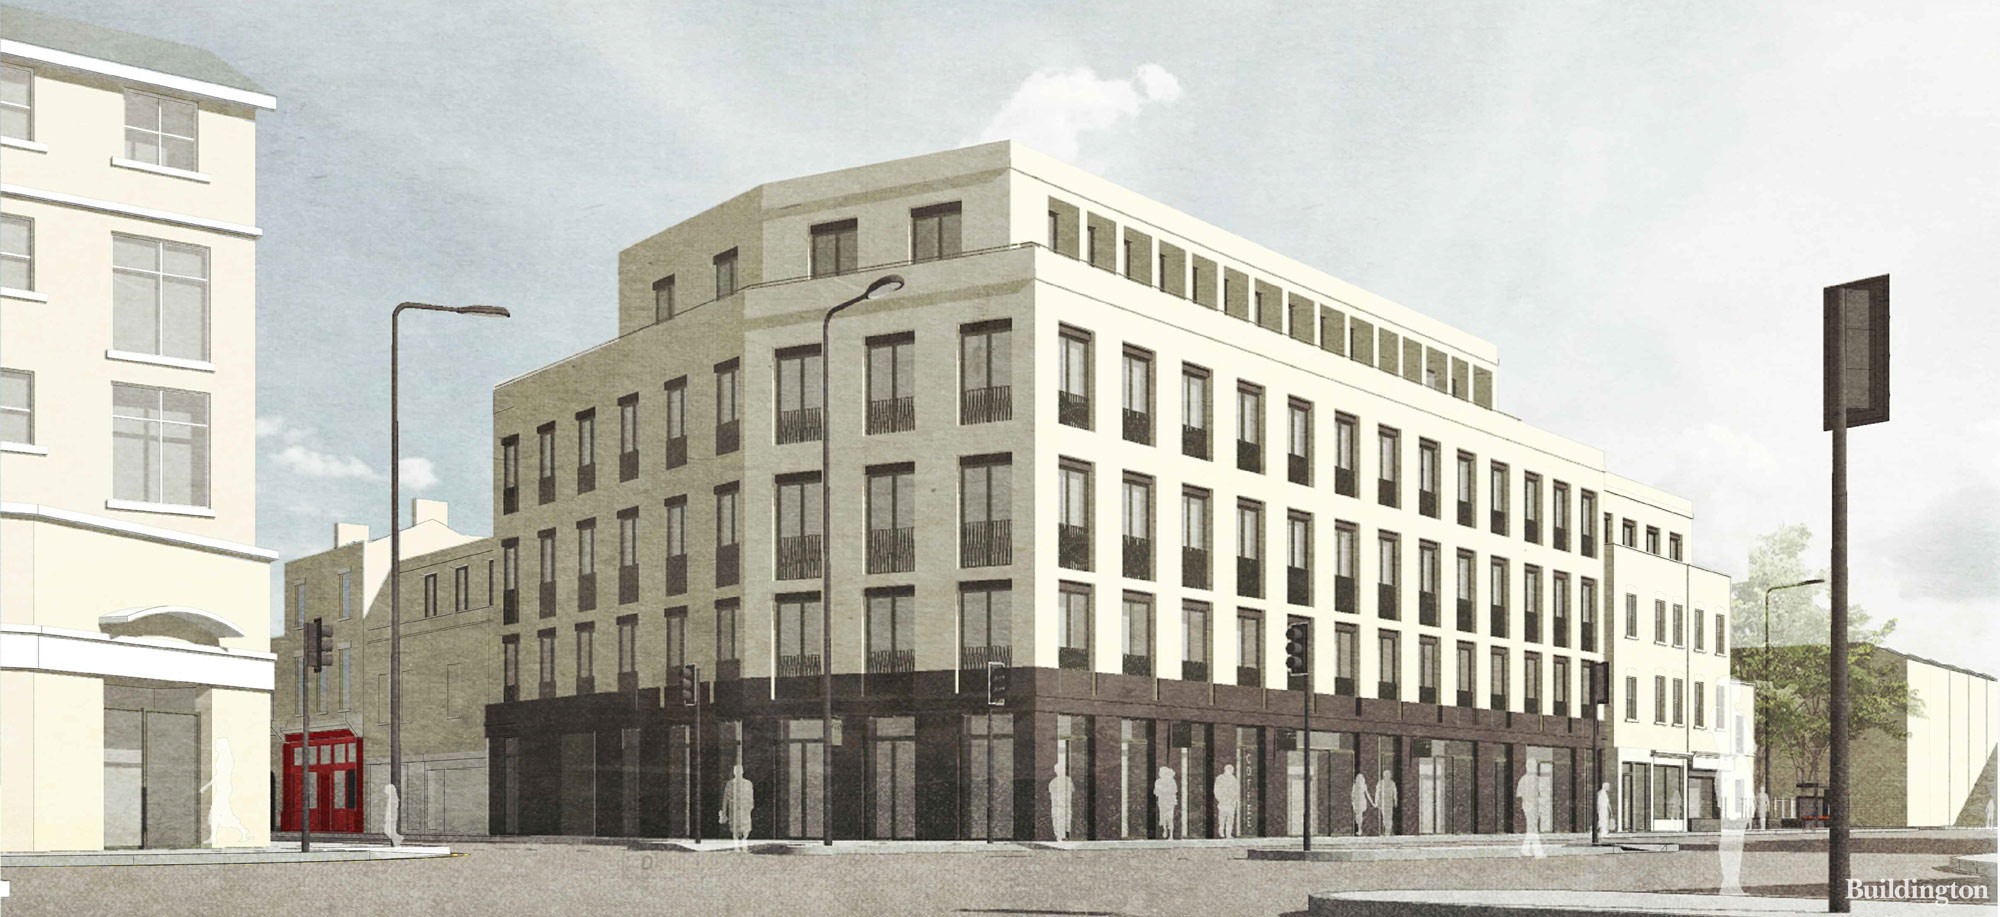 CGI of the 605-623 Commercial Road development in Limehouse, London E14, designed by Fraser Brown MacKenna Architects for The Elite Group. J3 secures structural warranty insurance in May 2022.